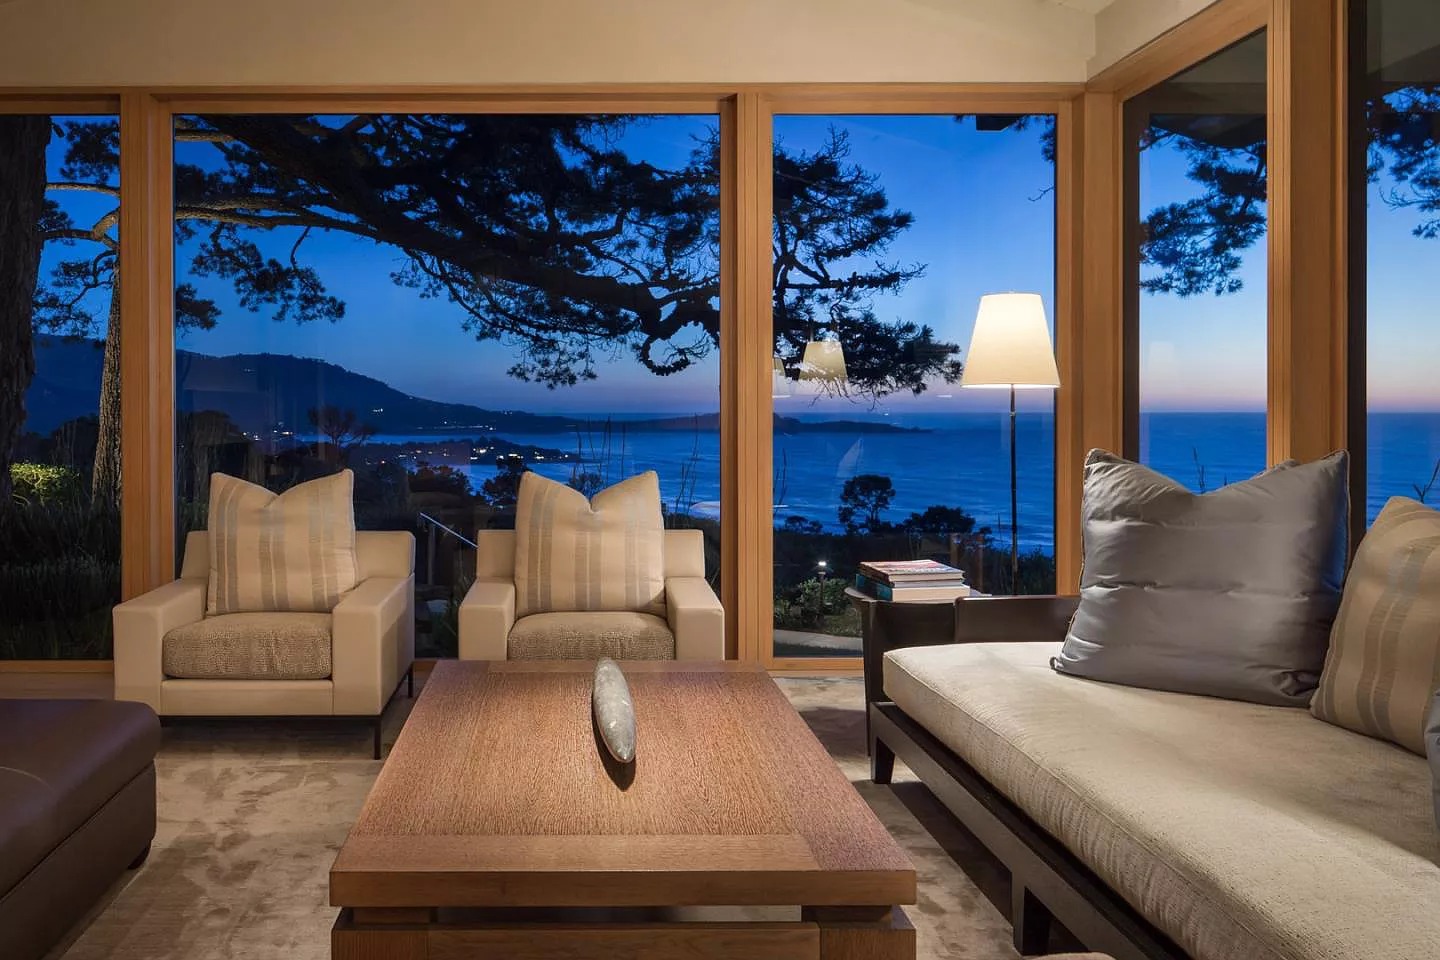 Pebble Beach, CA 93953 - $24,950,000 home for sale, house images, photos and pics gallery